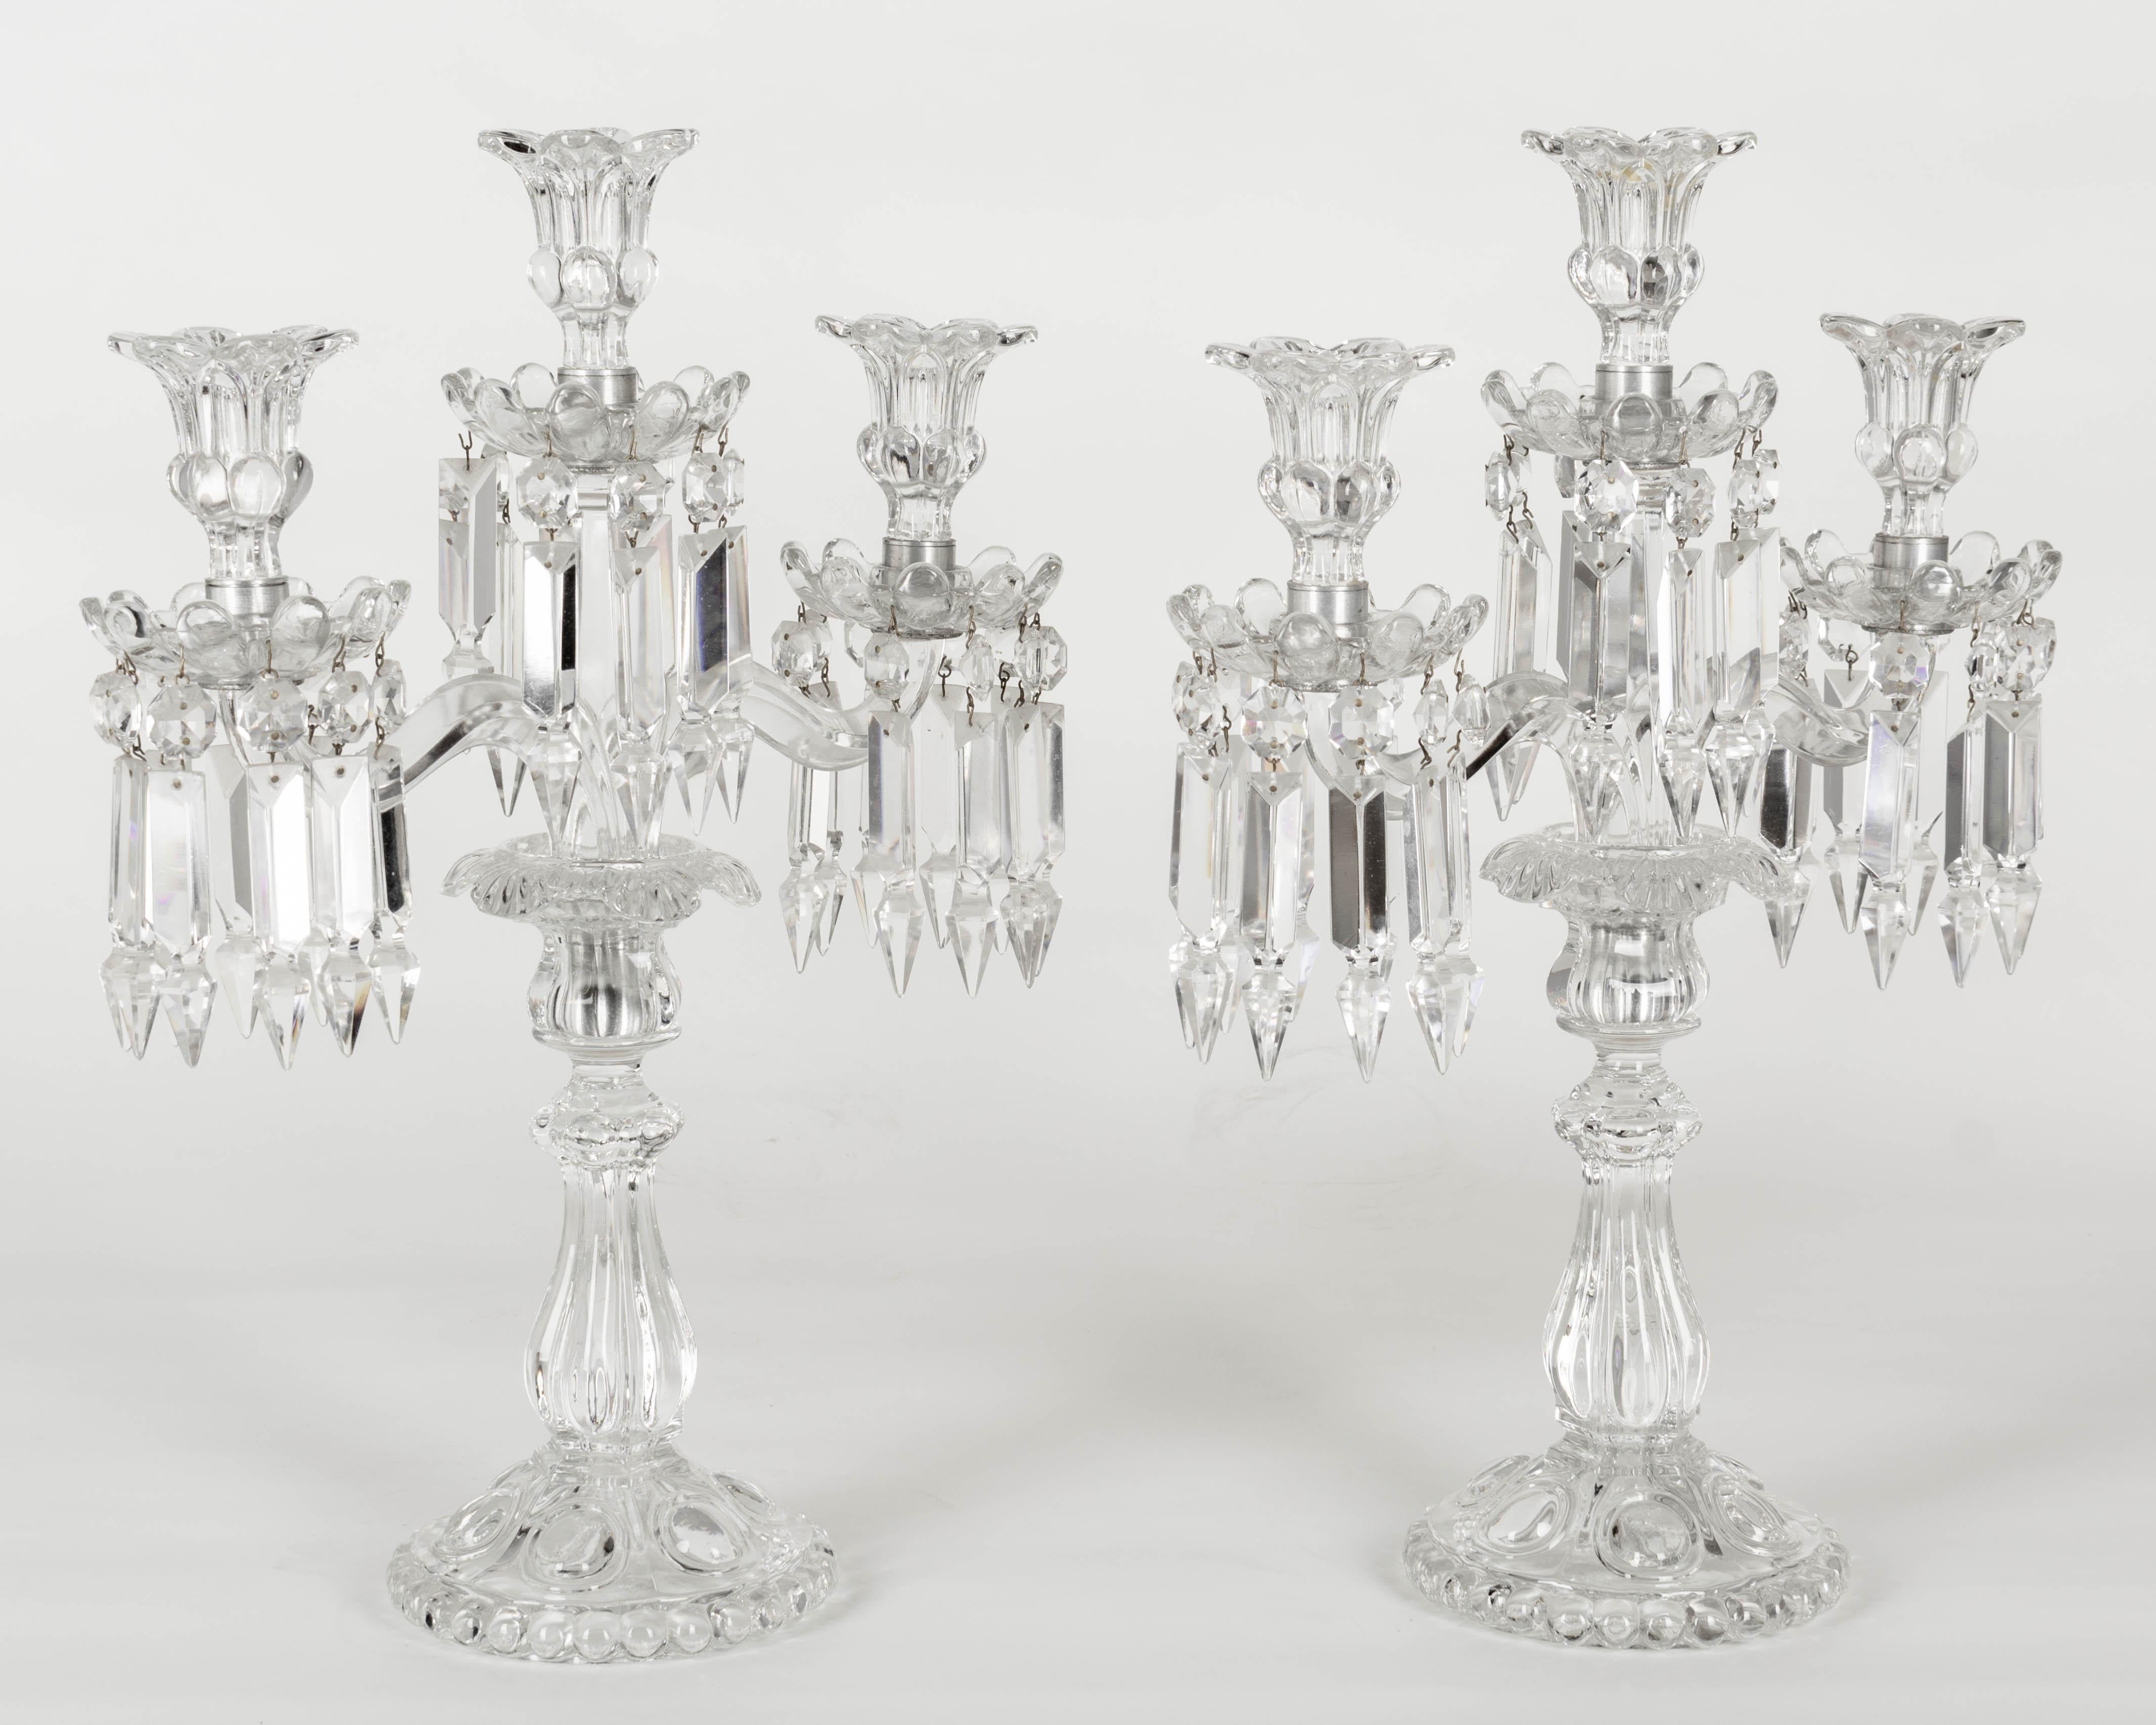 A pair of French Art Deco Baccarat crystal 3-light, two arm candelabras with Albert drop prisms and removable bobeches.